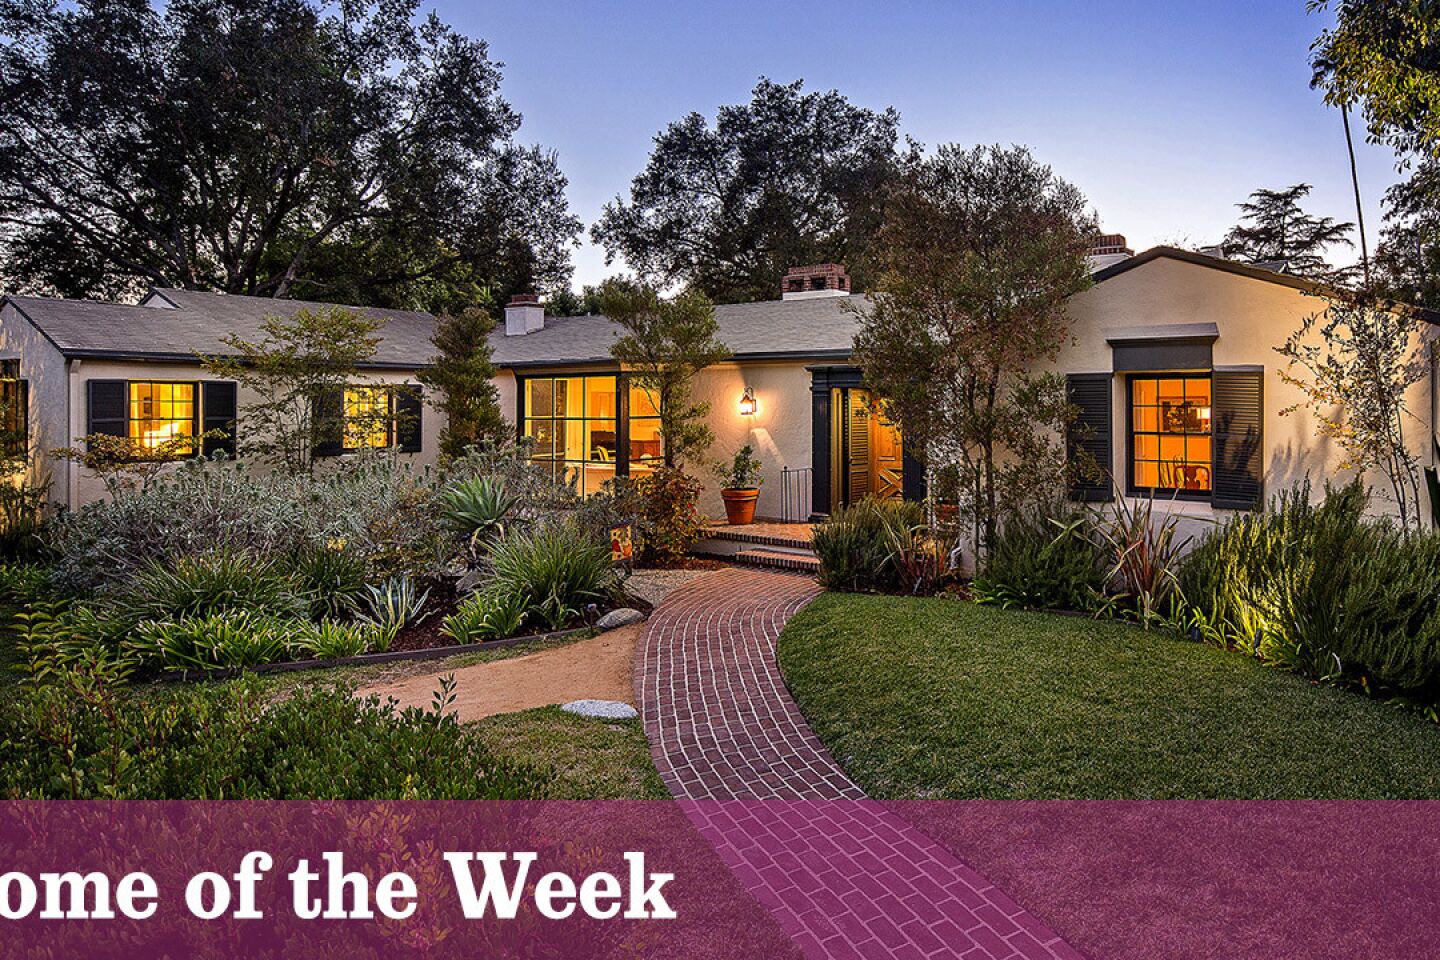 Home of the Week | A California classic in a park-like Altadena setting